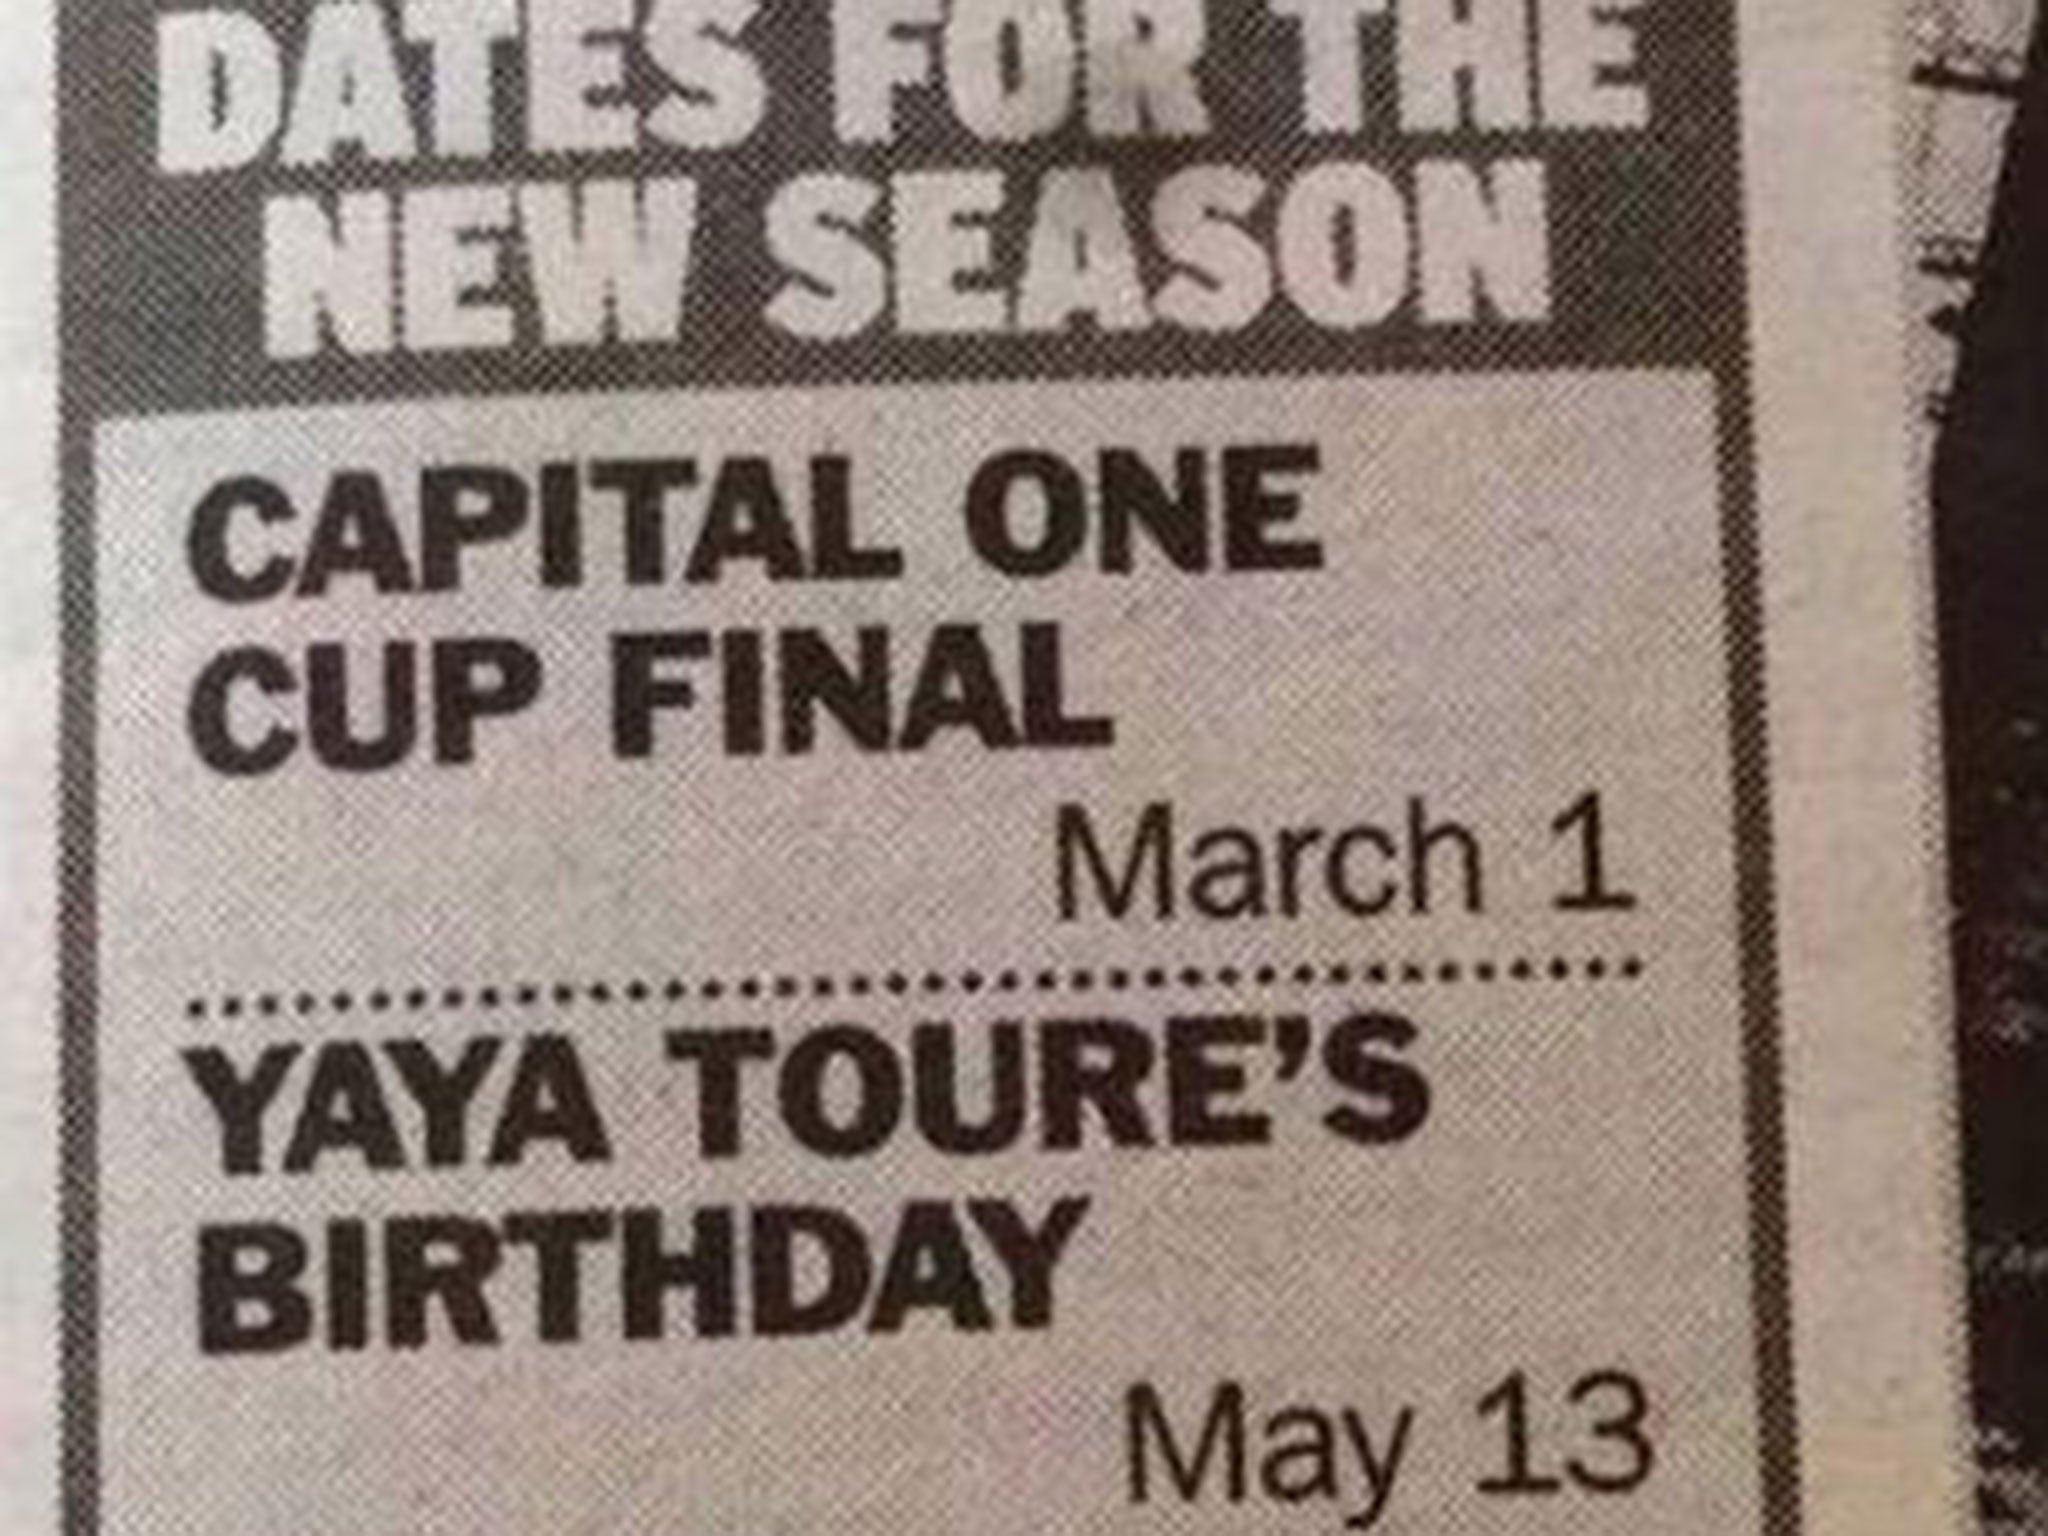 The Manchester Evening News have added Yaya Toure's Birthday in their dates for the season